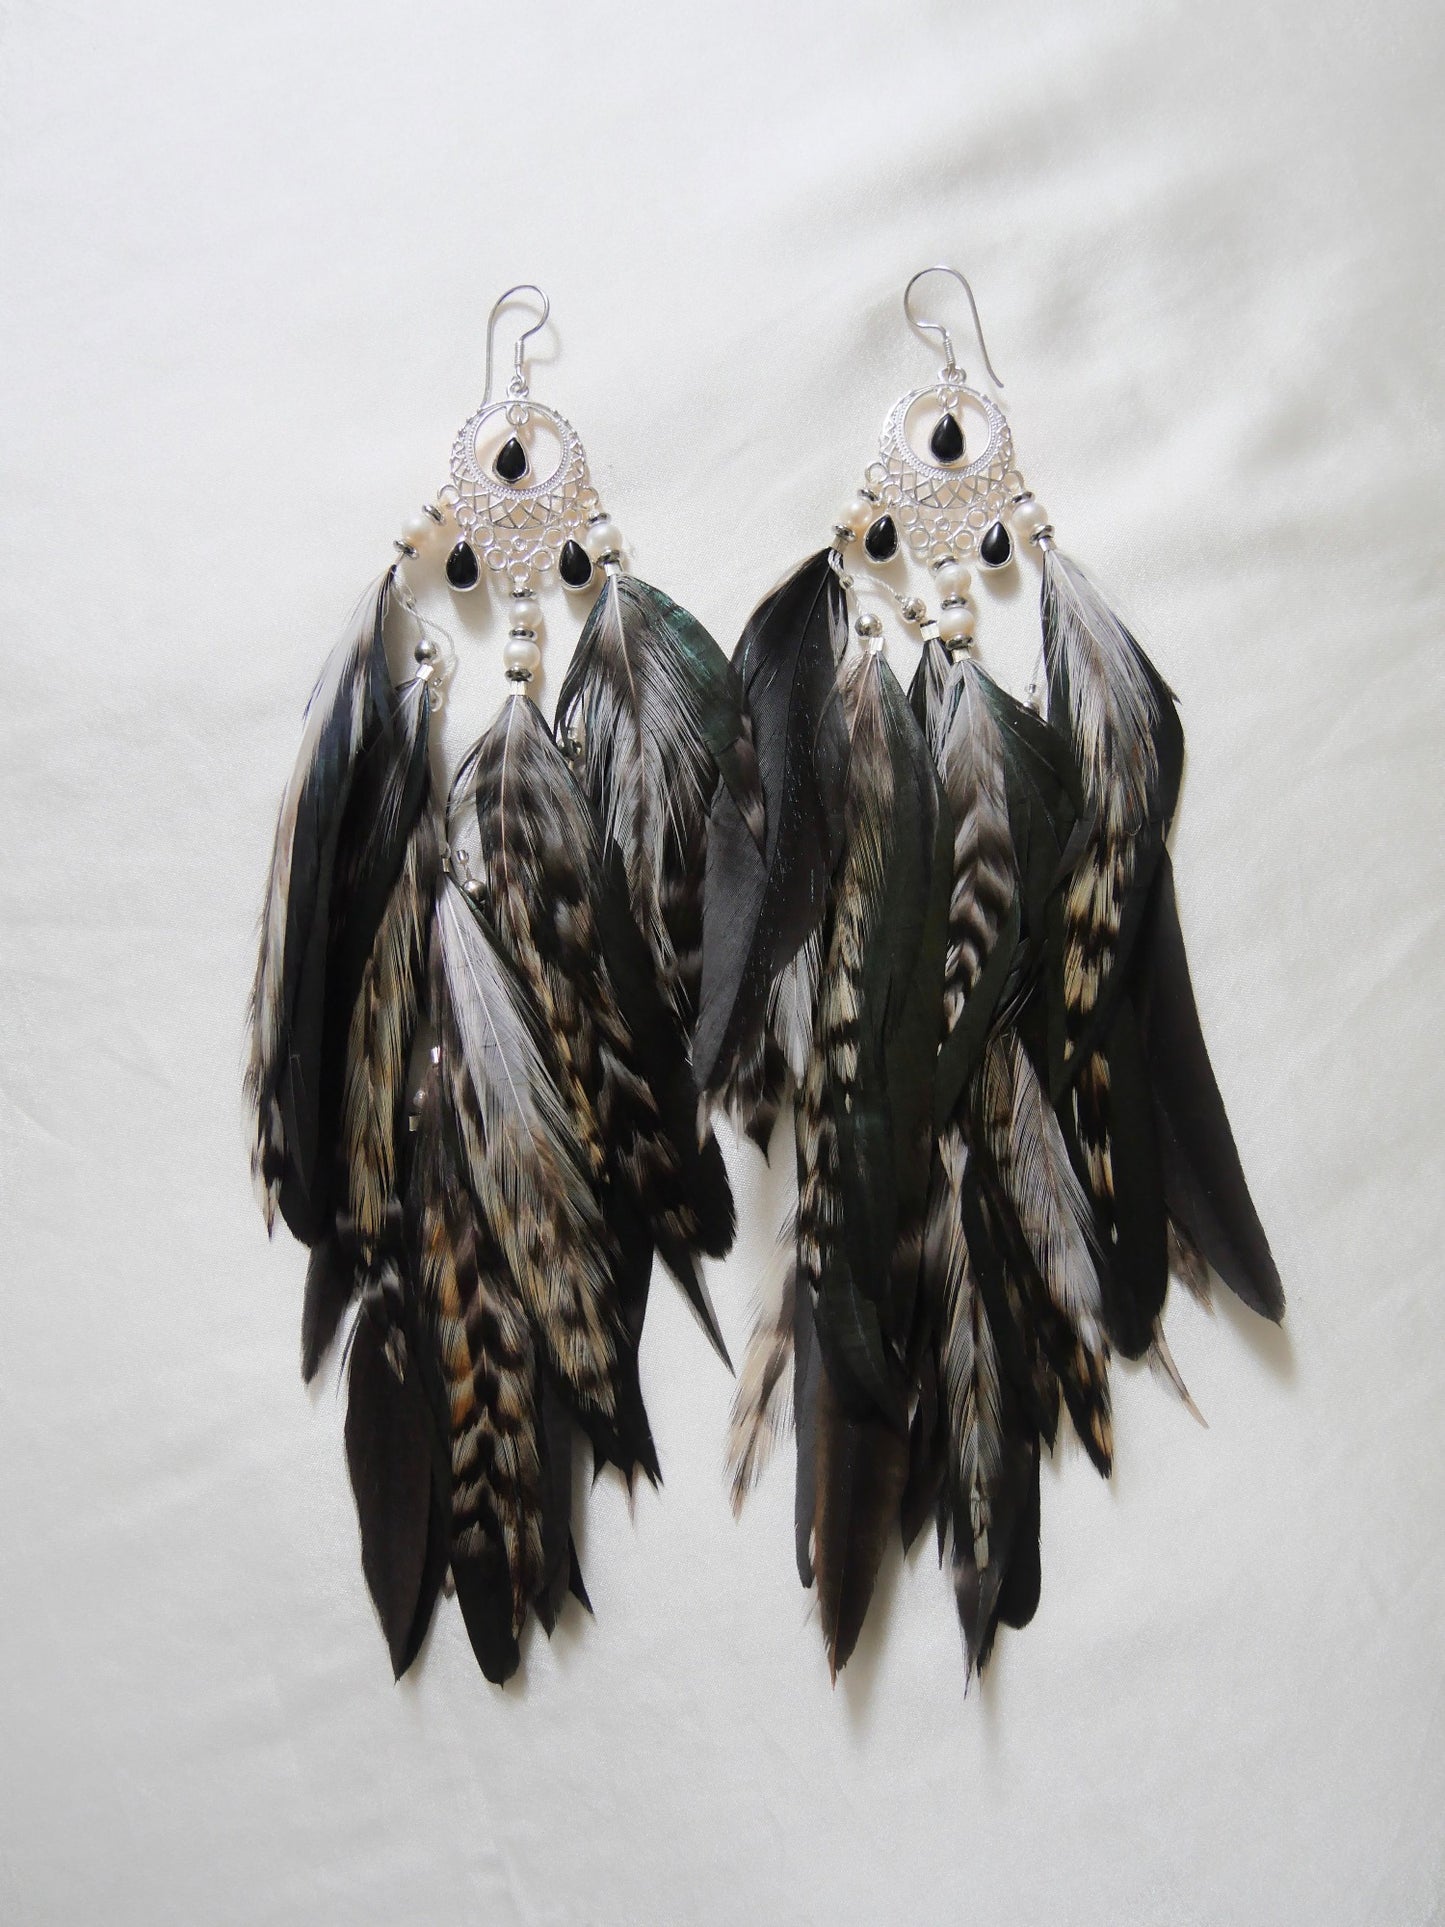 Bohemian Goddess I Embrace the Light and Dark within Me - Onyx Feather Earrings Long